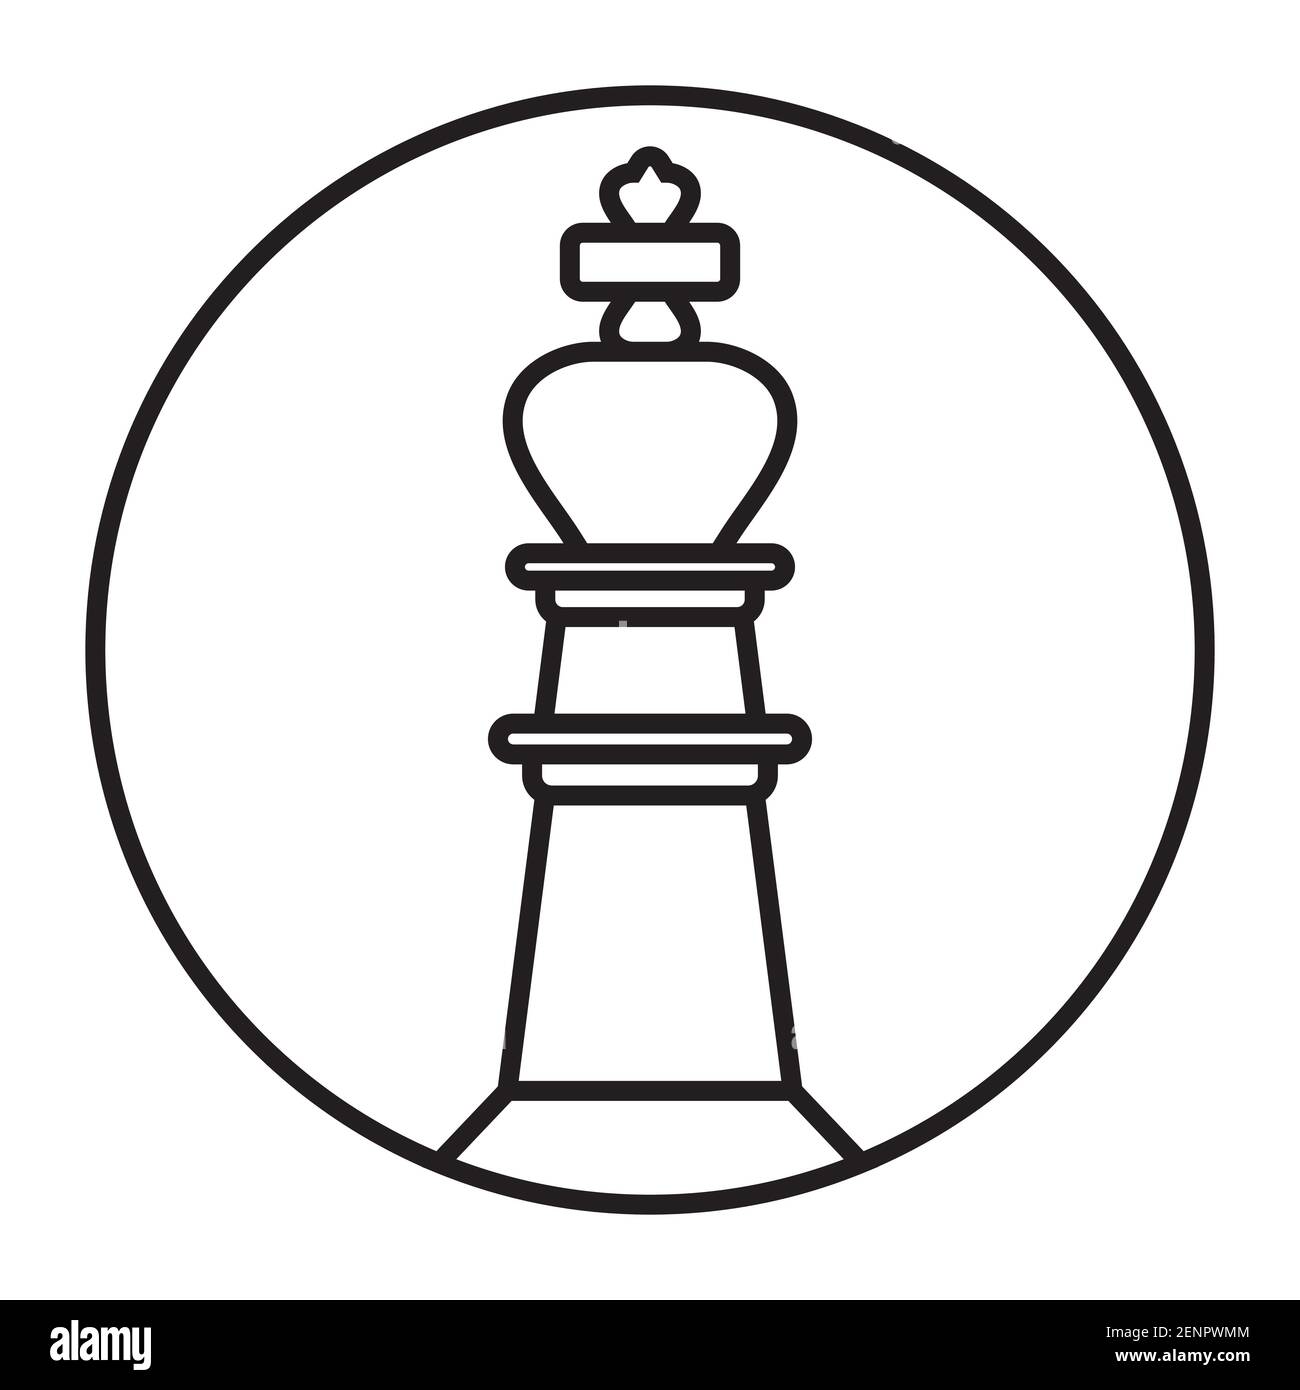 Rounded a king chess piece line art icon for apps or website Stock Vector